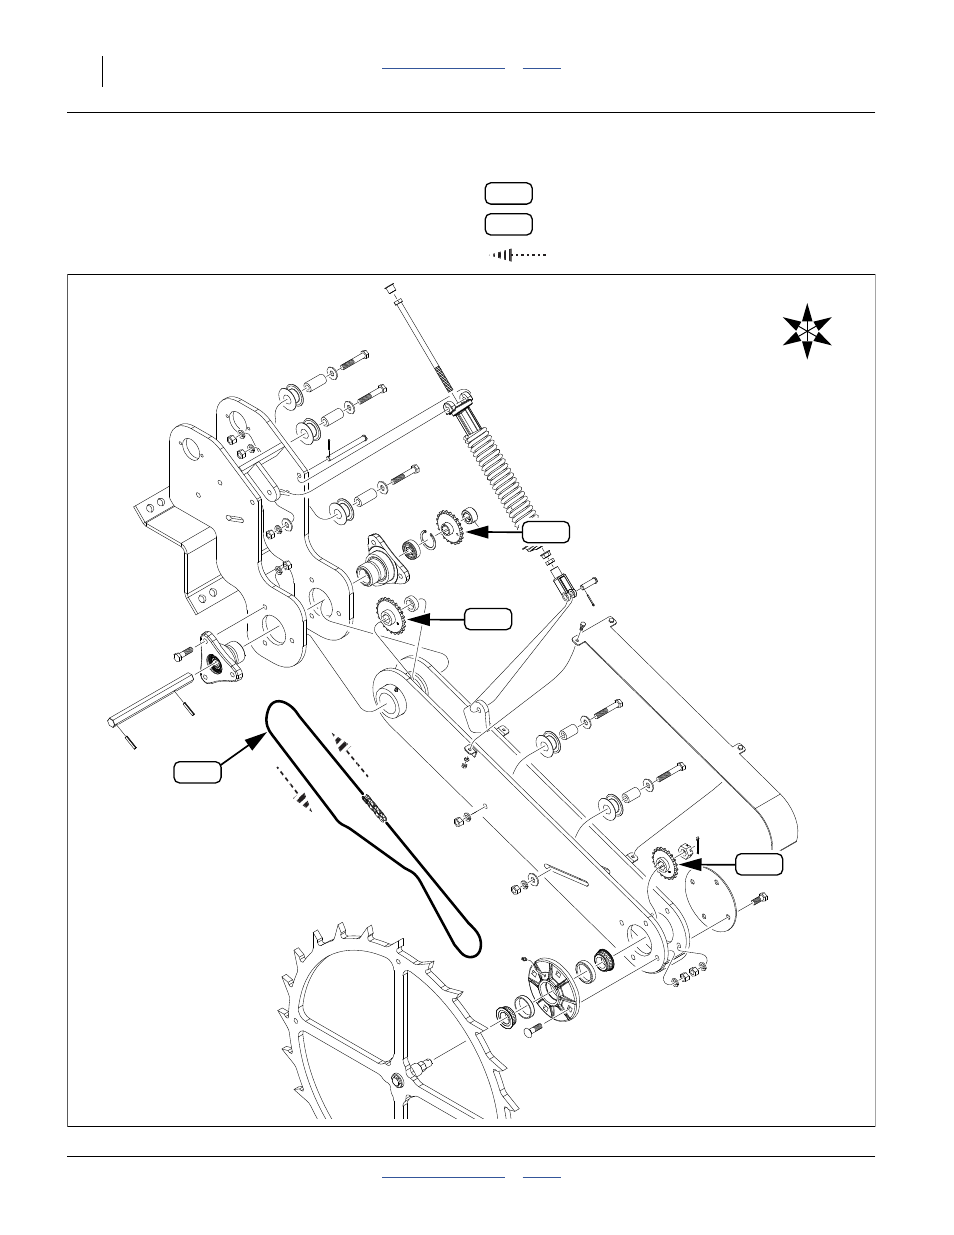 Chain routing, 34t 56p, 23t 21t | Great Plains YP825A3P Operator Manual User Manual | Page 110 / 128